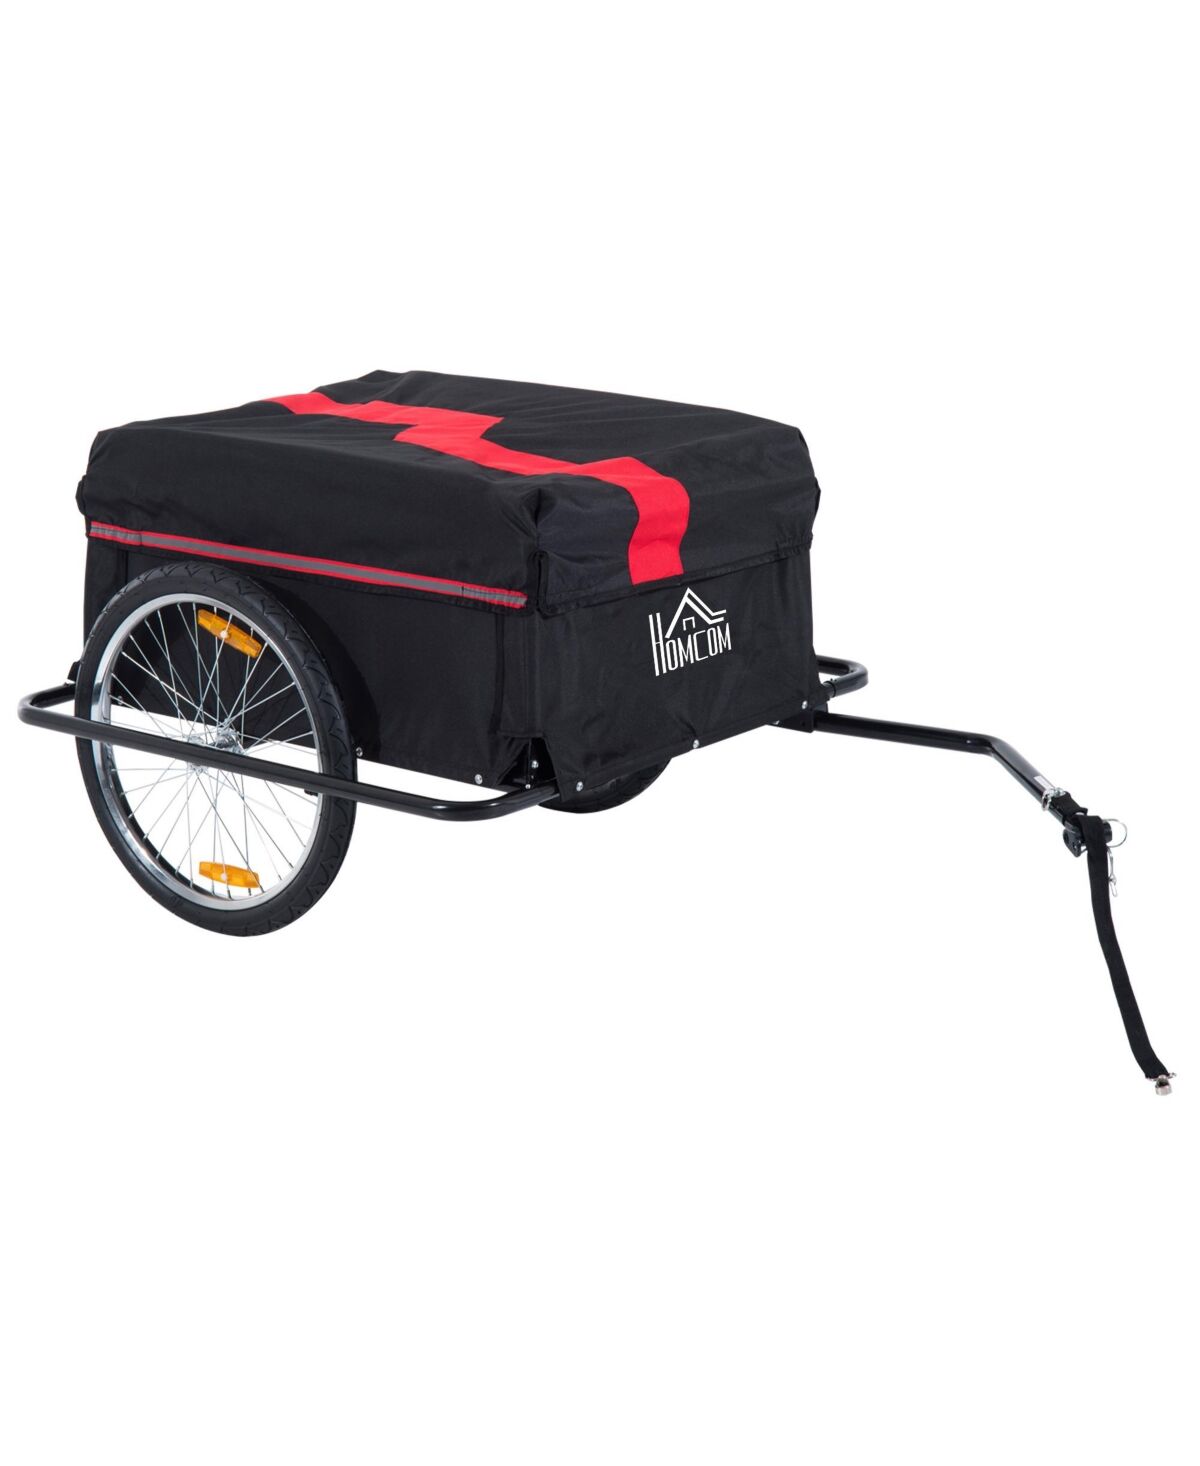 Aosom Bicycle Cargo Trailer, Two-Wheel Bike Luggage Wagon Bicycle Trailer with Removable Cover, Red - Black and red